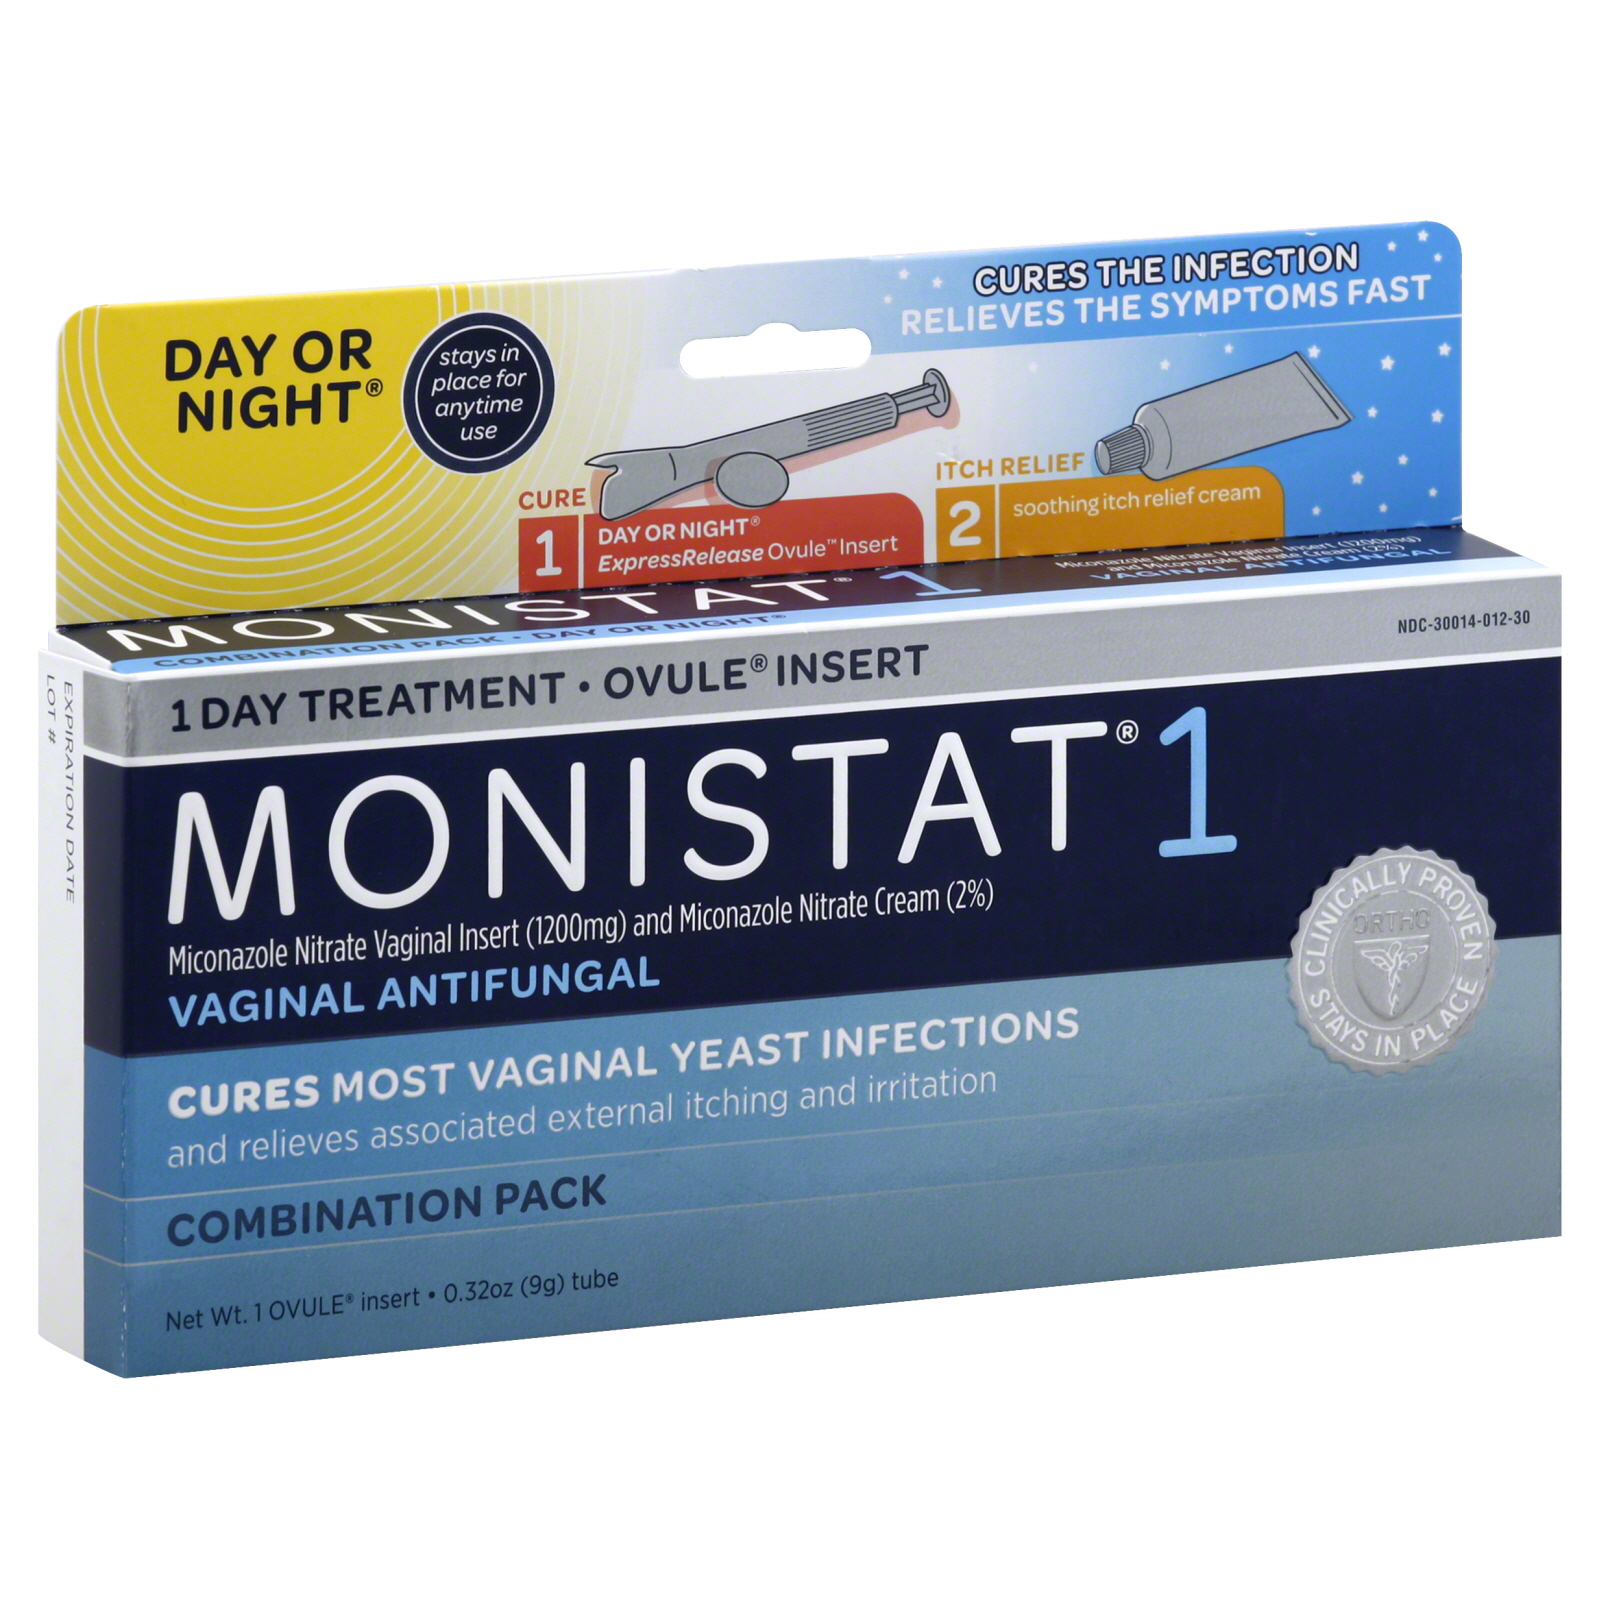 Monistat 1 Day or Night Vaginal Antifungal, Combination Pack, 1 pack